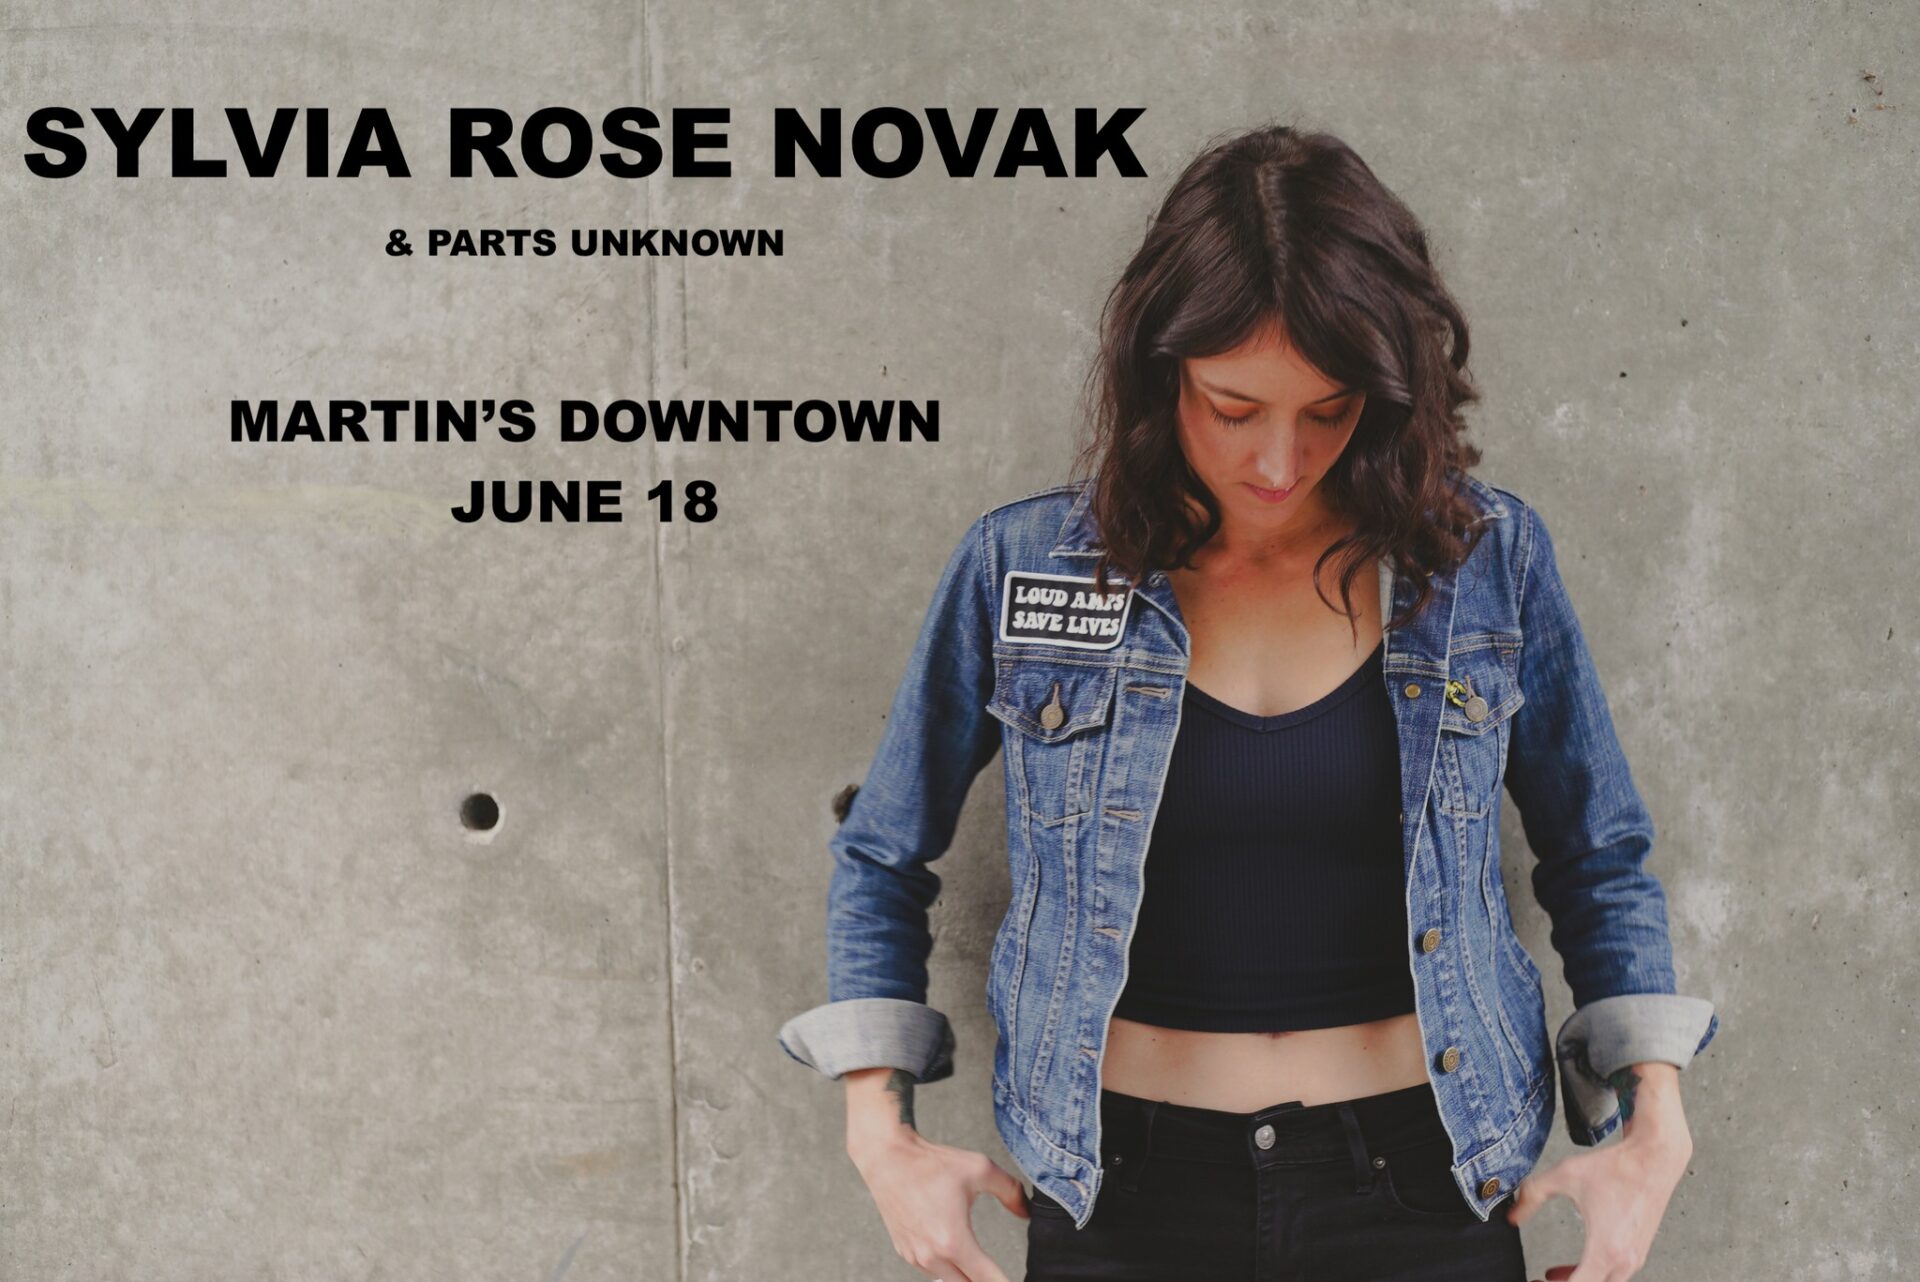 Sylvia Rose Novak & Parts Unknown Live at Martin’s Downtown